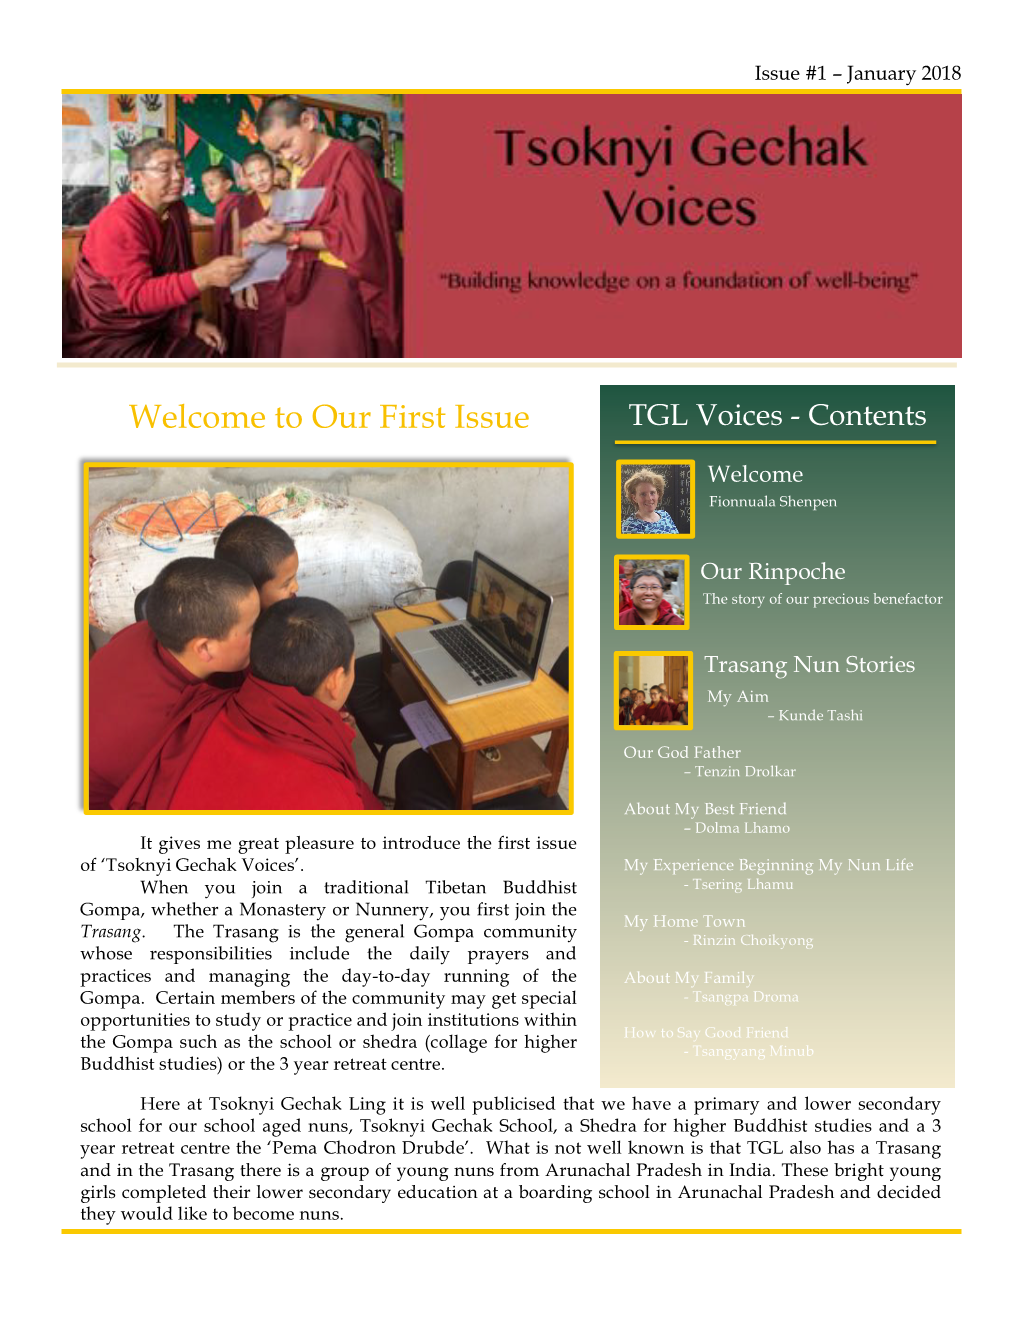 Our First Issue TGL Voices - Contents